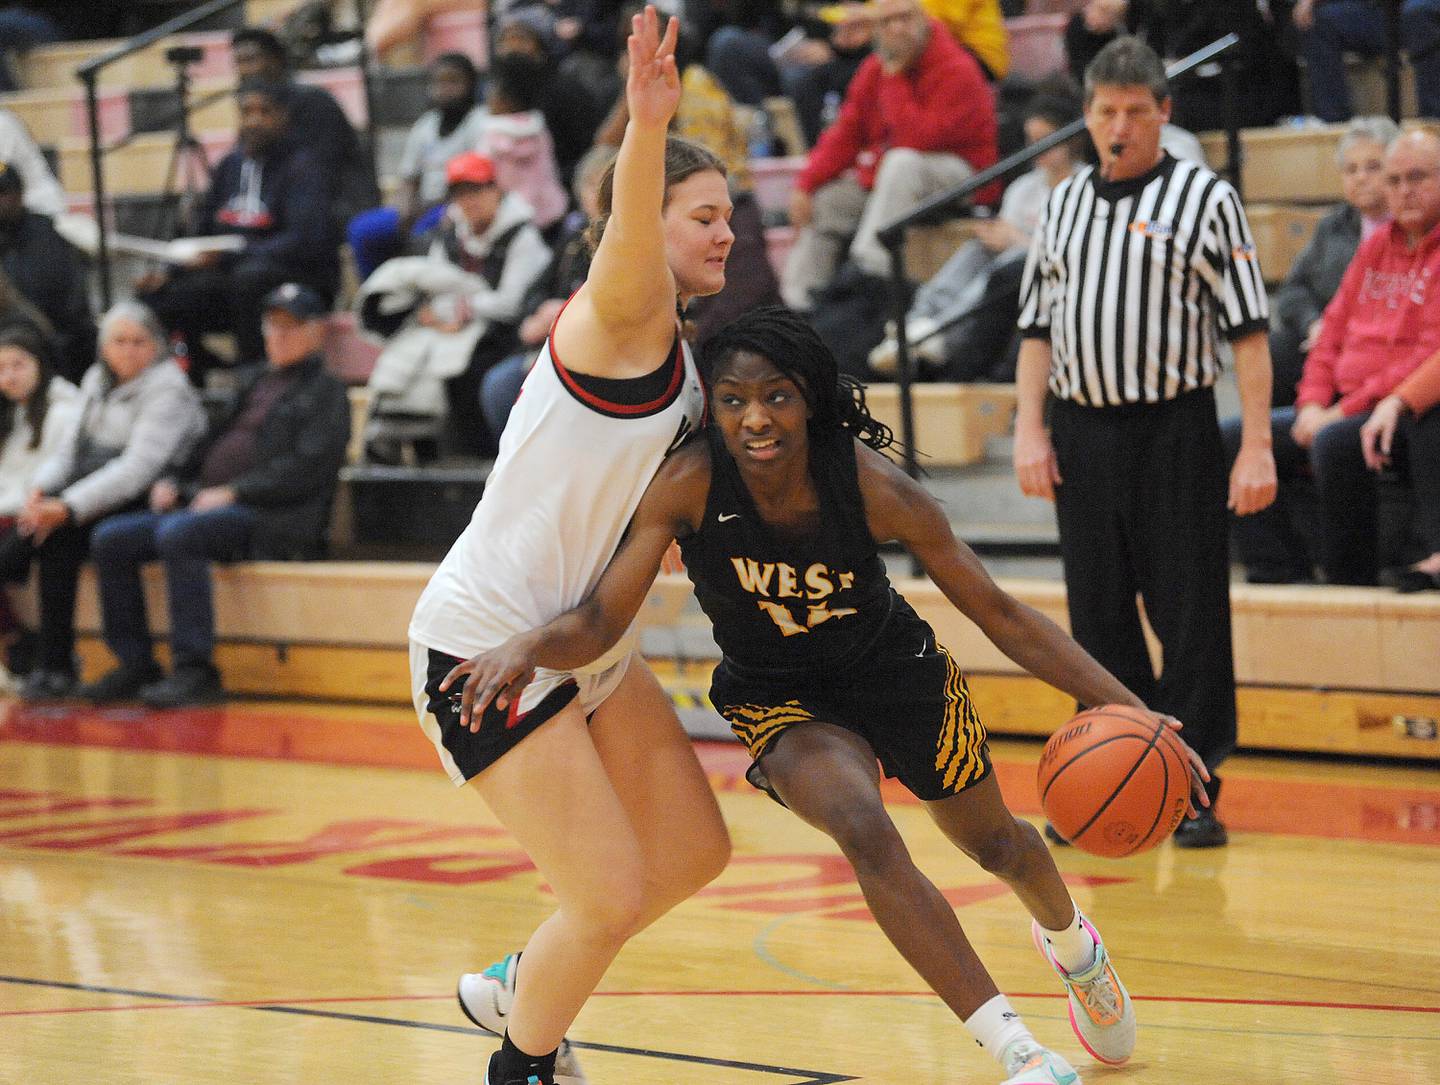 Joliet West's Destiny McNair (14) drives around Yorkville defender Ava Diqui during a girls' basketball game at Yorkville on Thursday, Jan. 19, 2023.